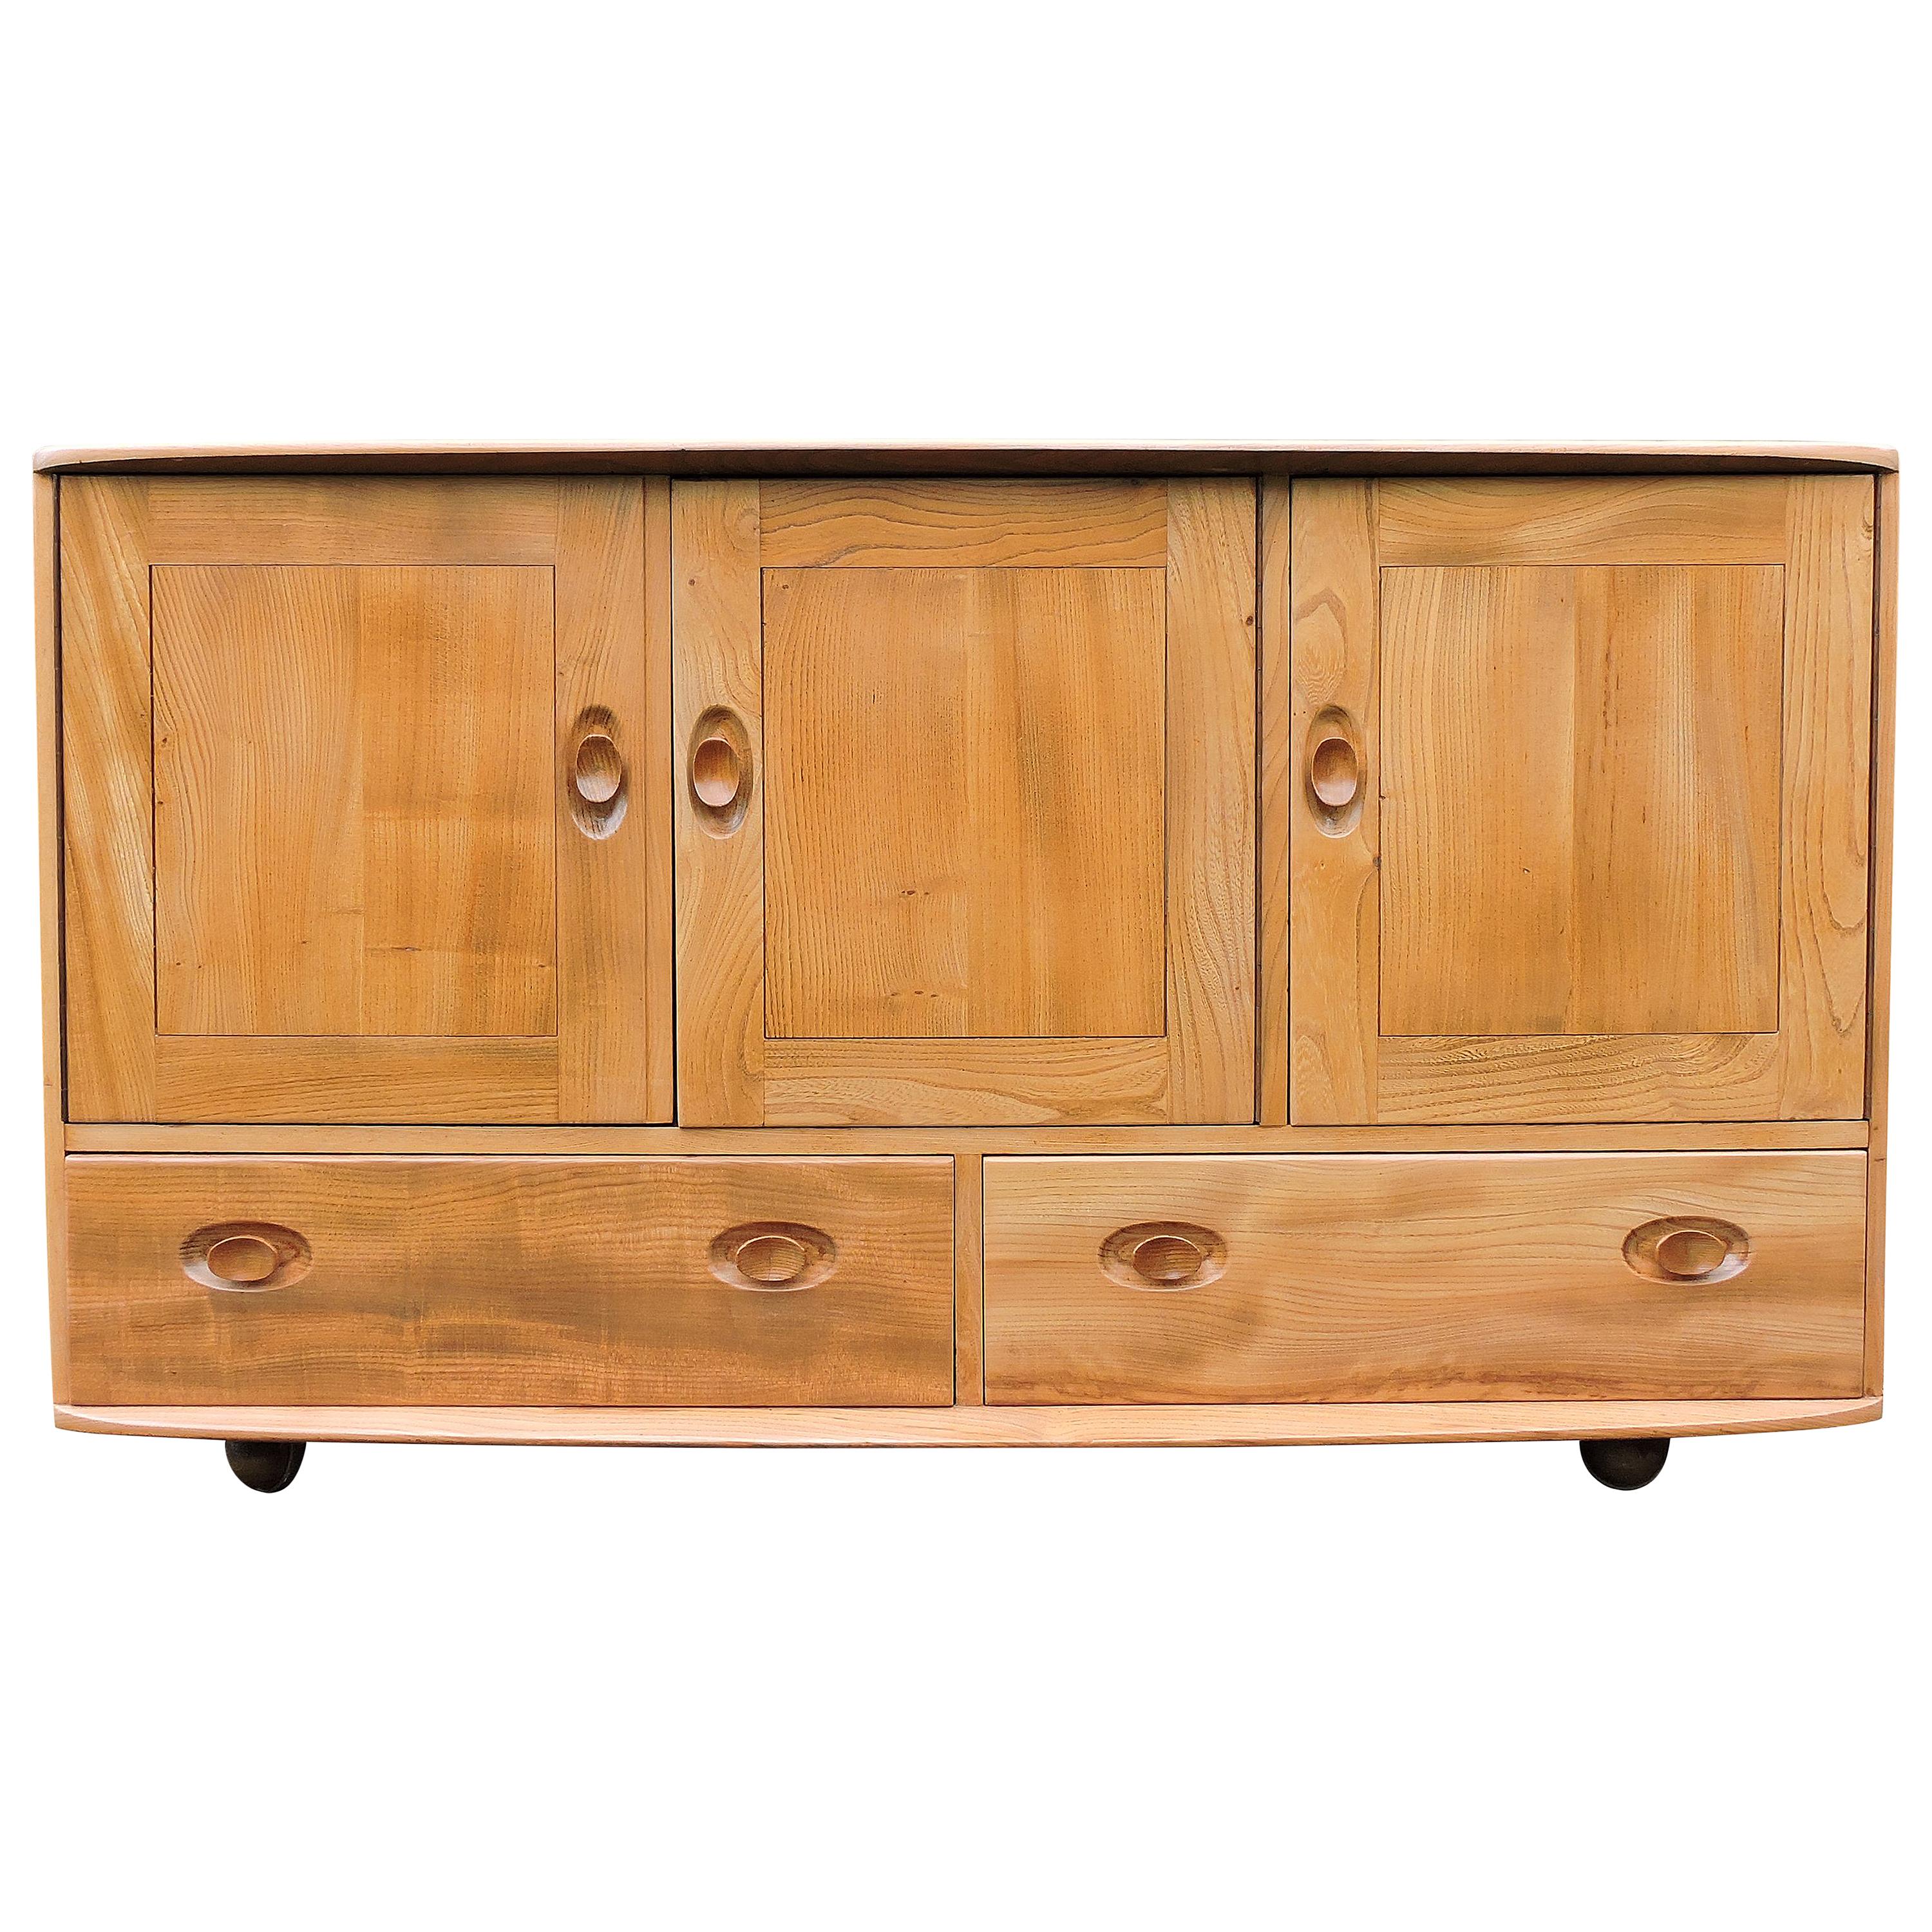 Windsor Model 468 Blonde Sideboard With Drawers by Ercol, 1960s For Sale